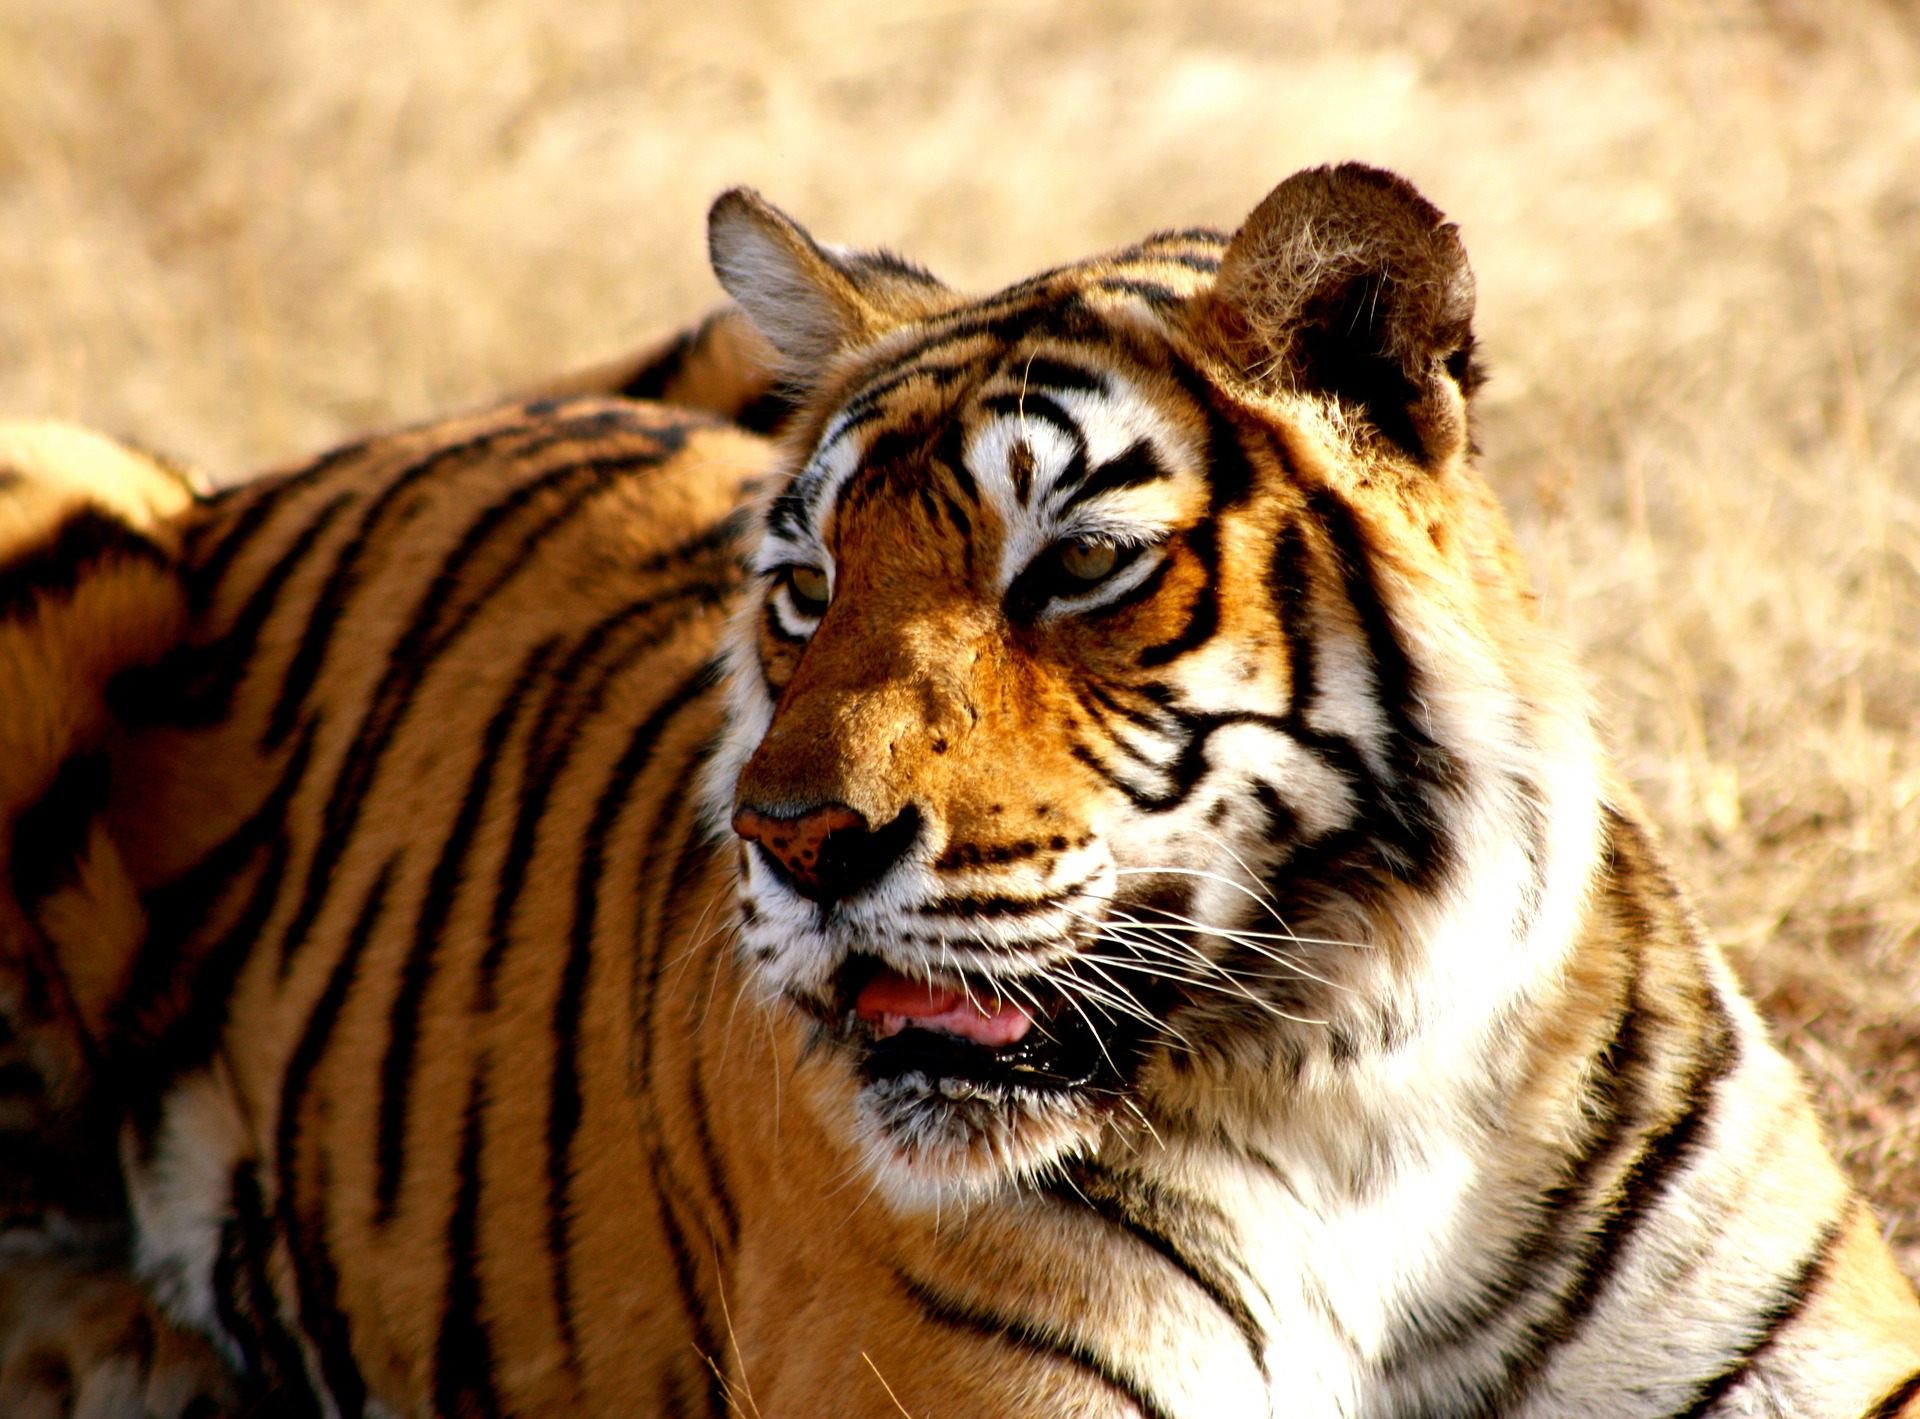 A bengal tiger in India